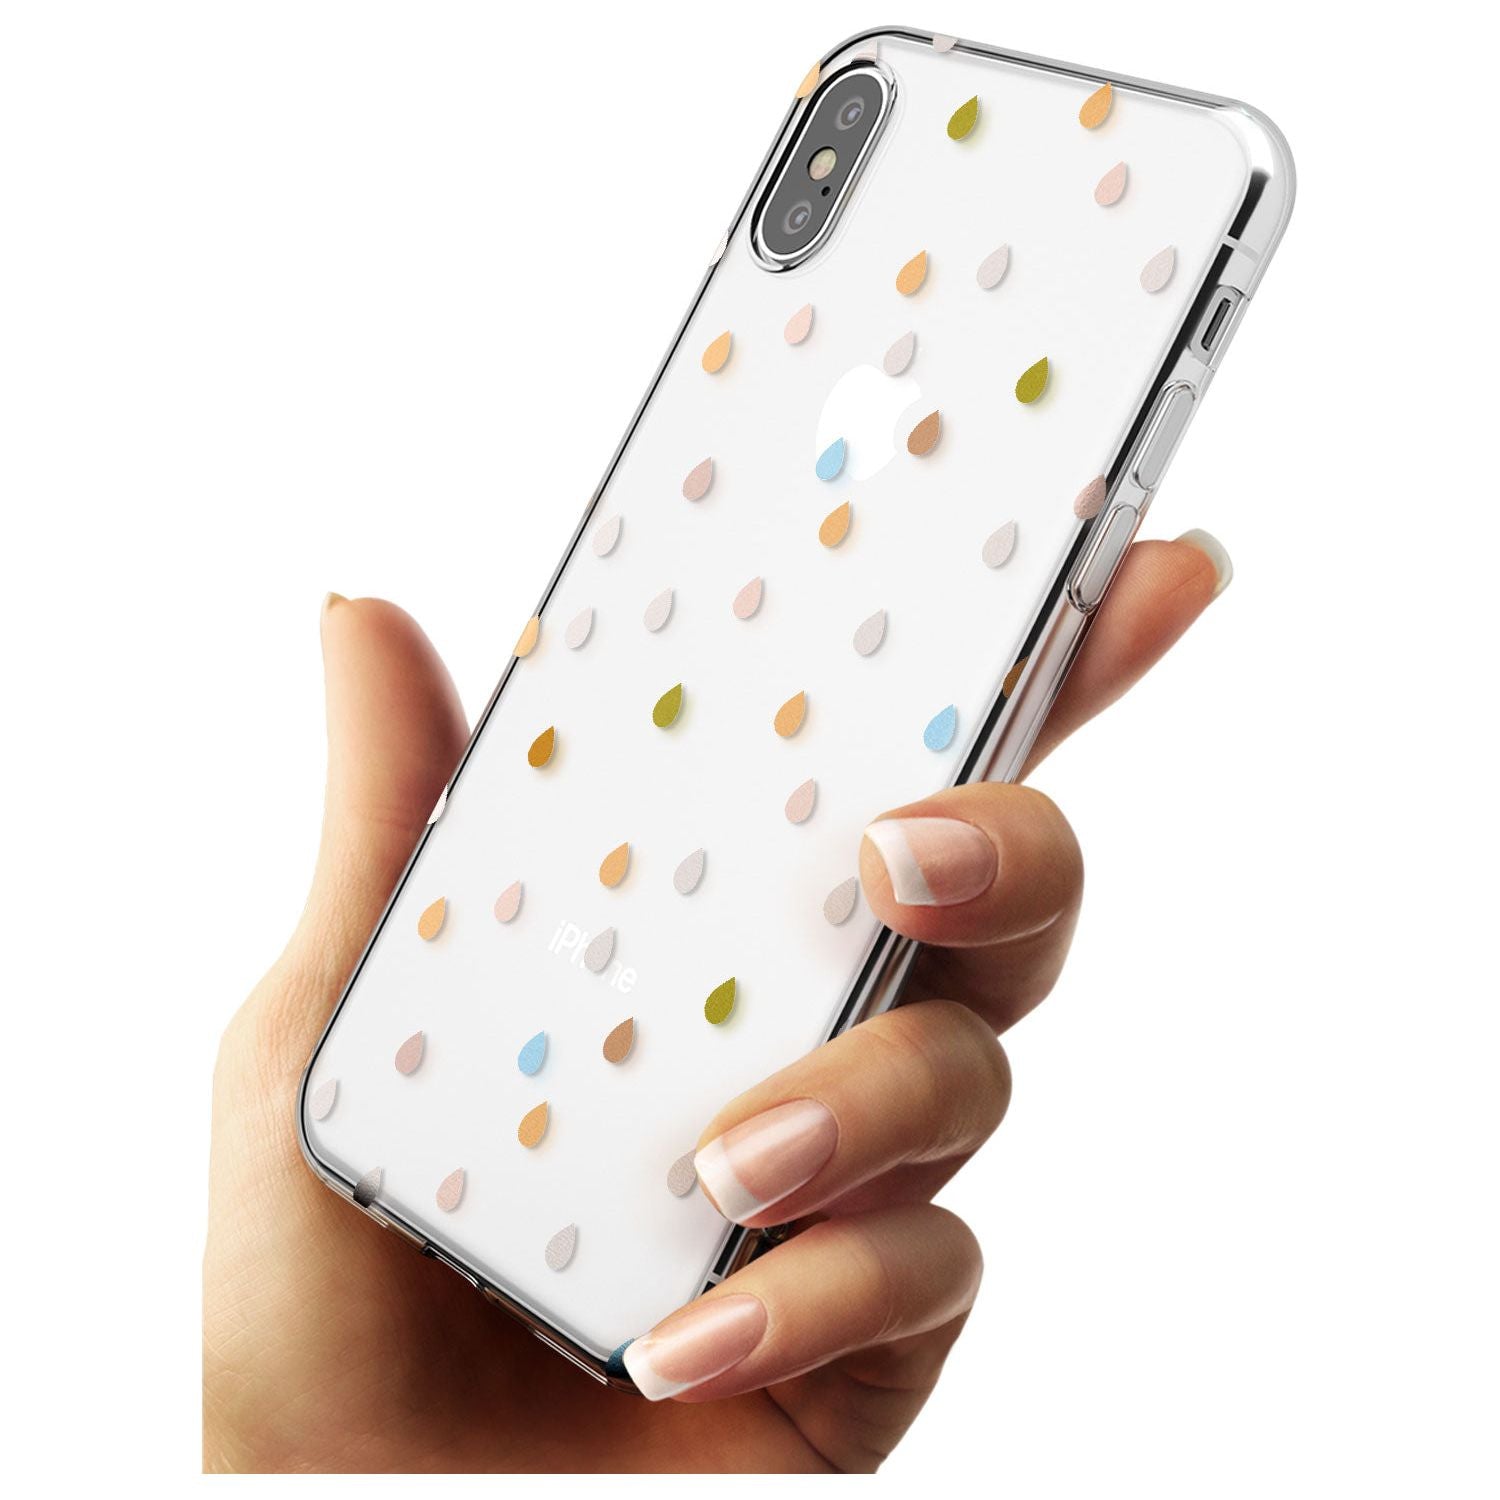 Raindrops Black Impact Phone Case for iPhone X XS Max XR